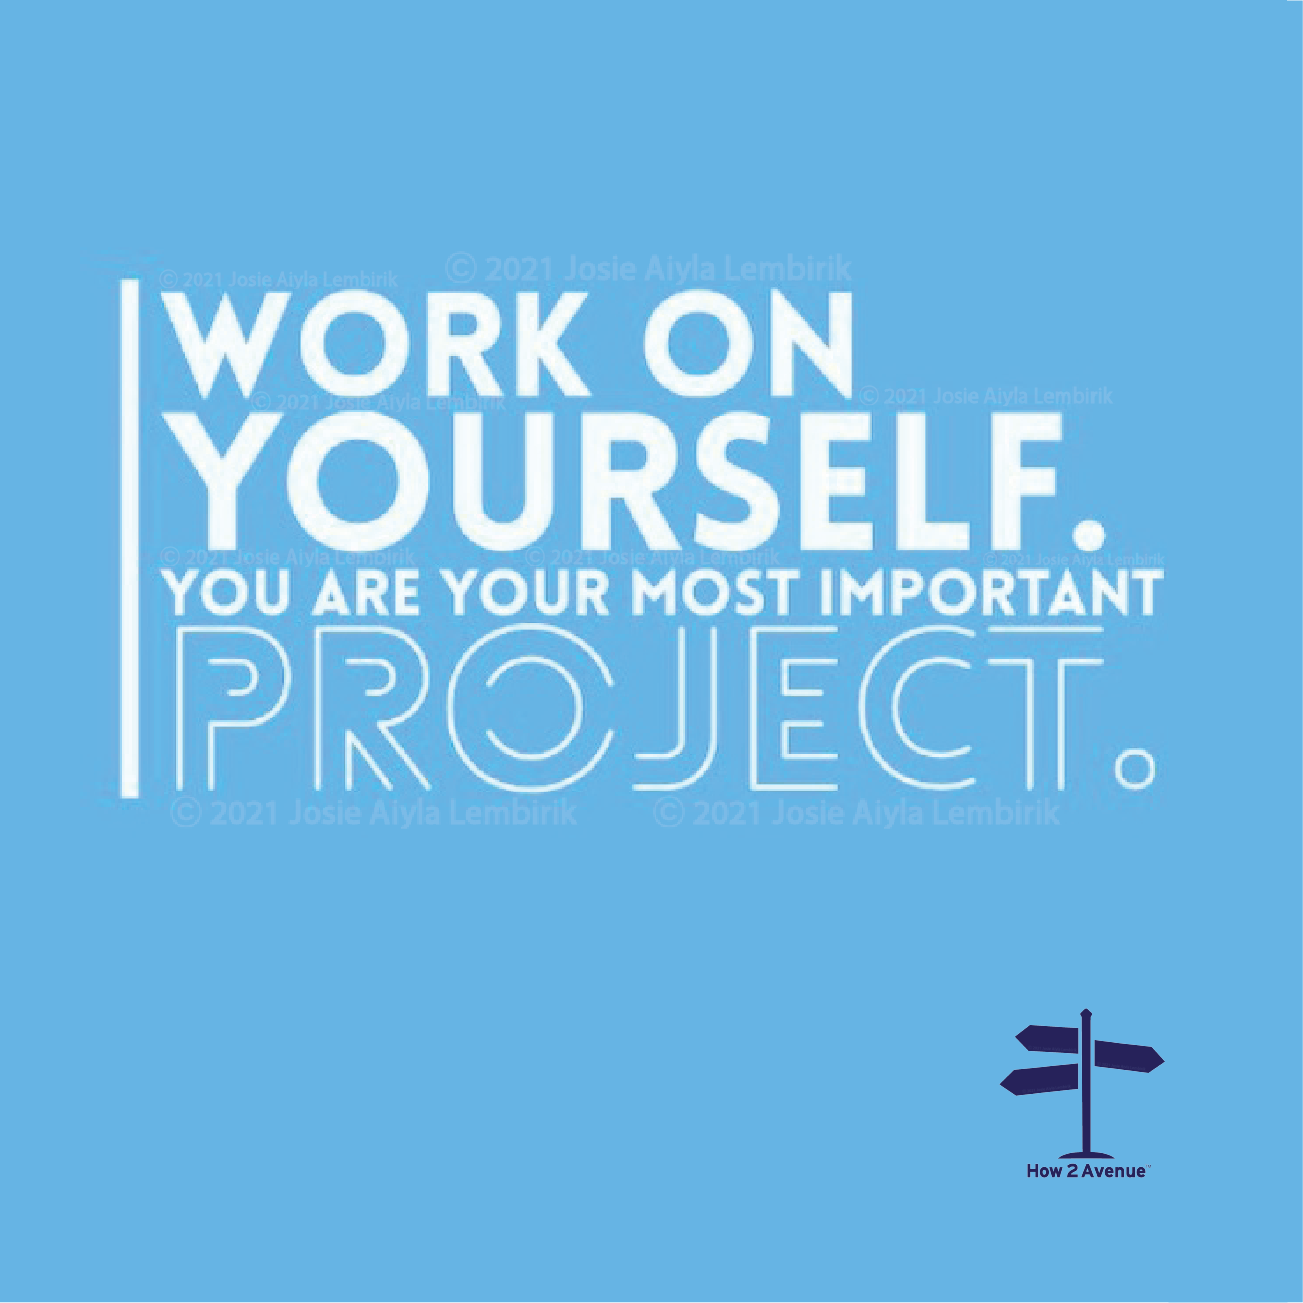 Work on Yourself. You Are Your Most Important Project.